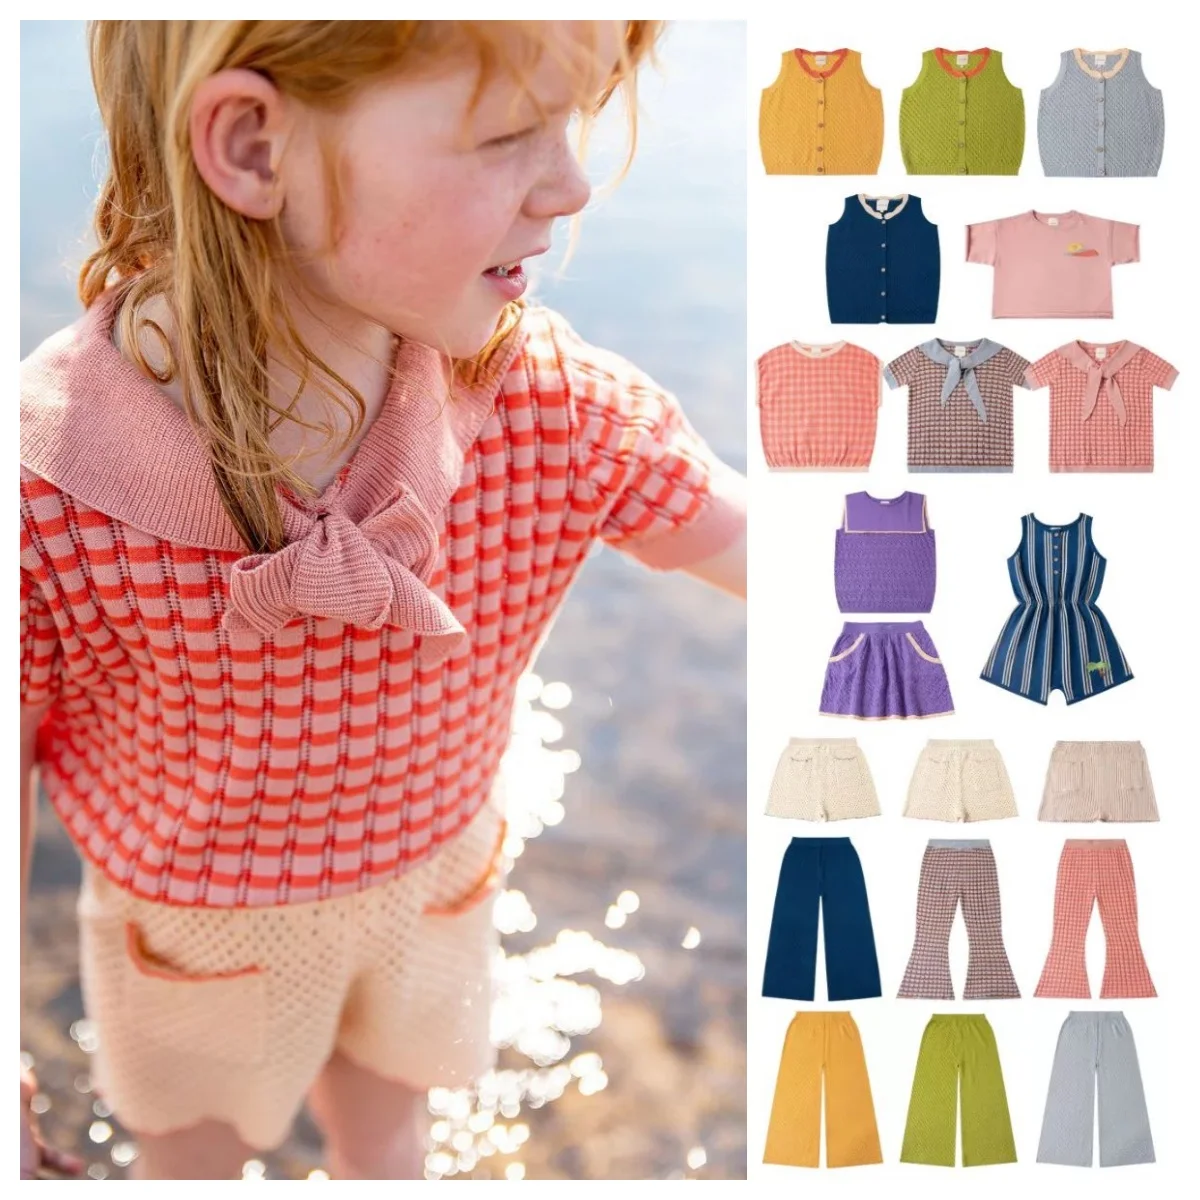 

Kids Sets 24 New Summer Products for Boys Girls Kp Modal Cotton Cool Knitted Tops Girls' Bell Bottoms Kids Clothes Girls